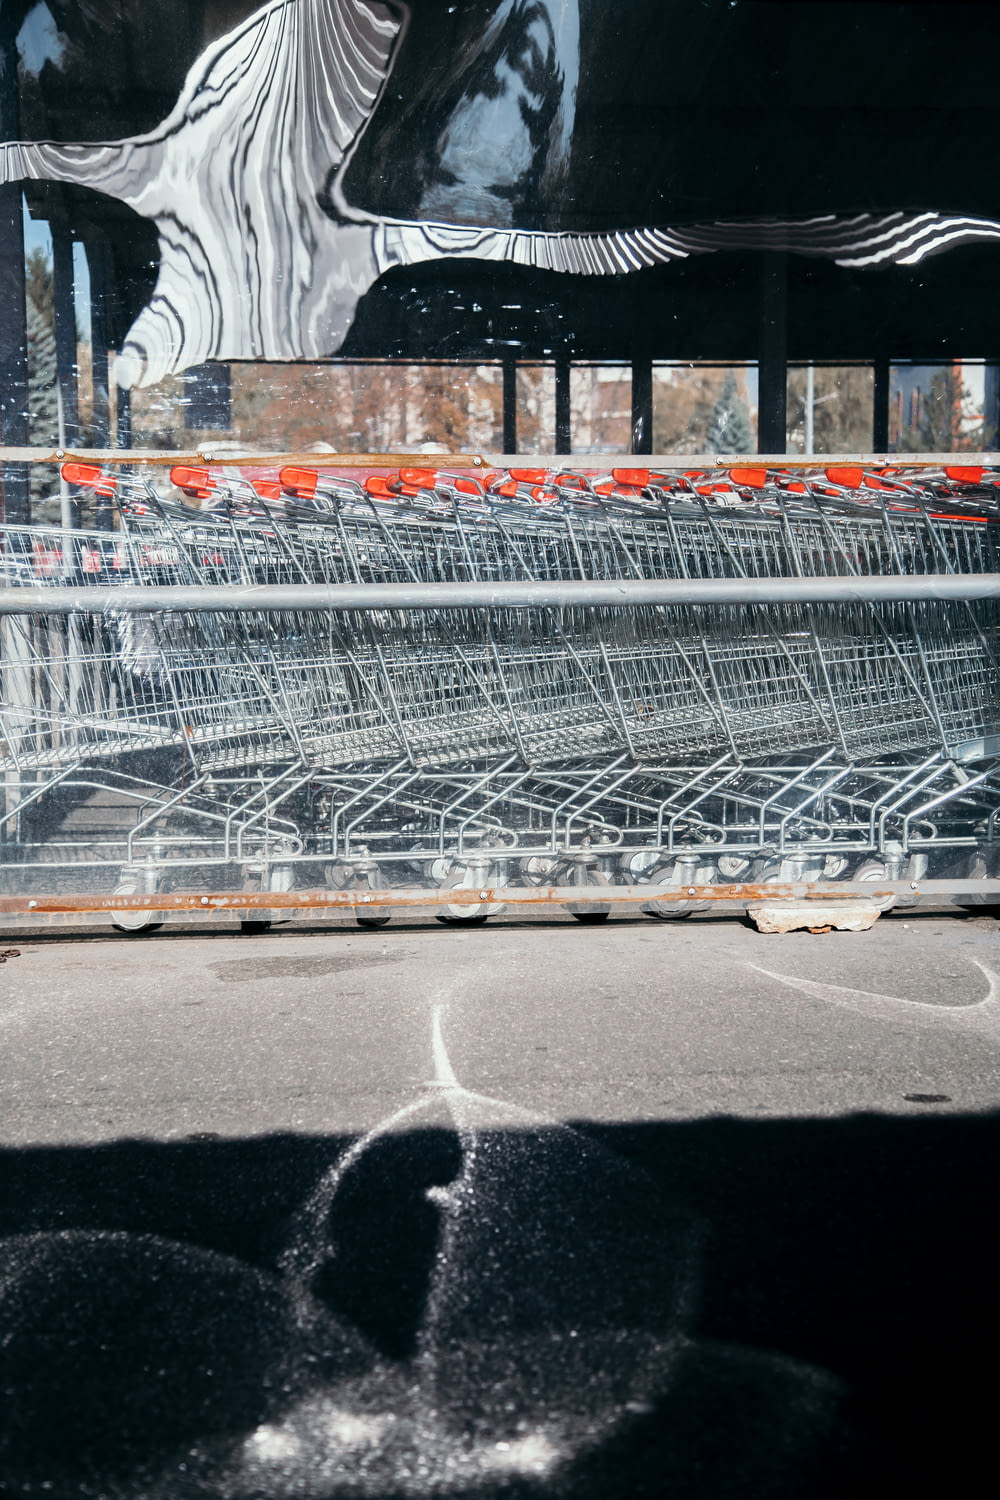 photo of grocery carts